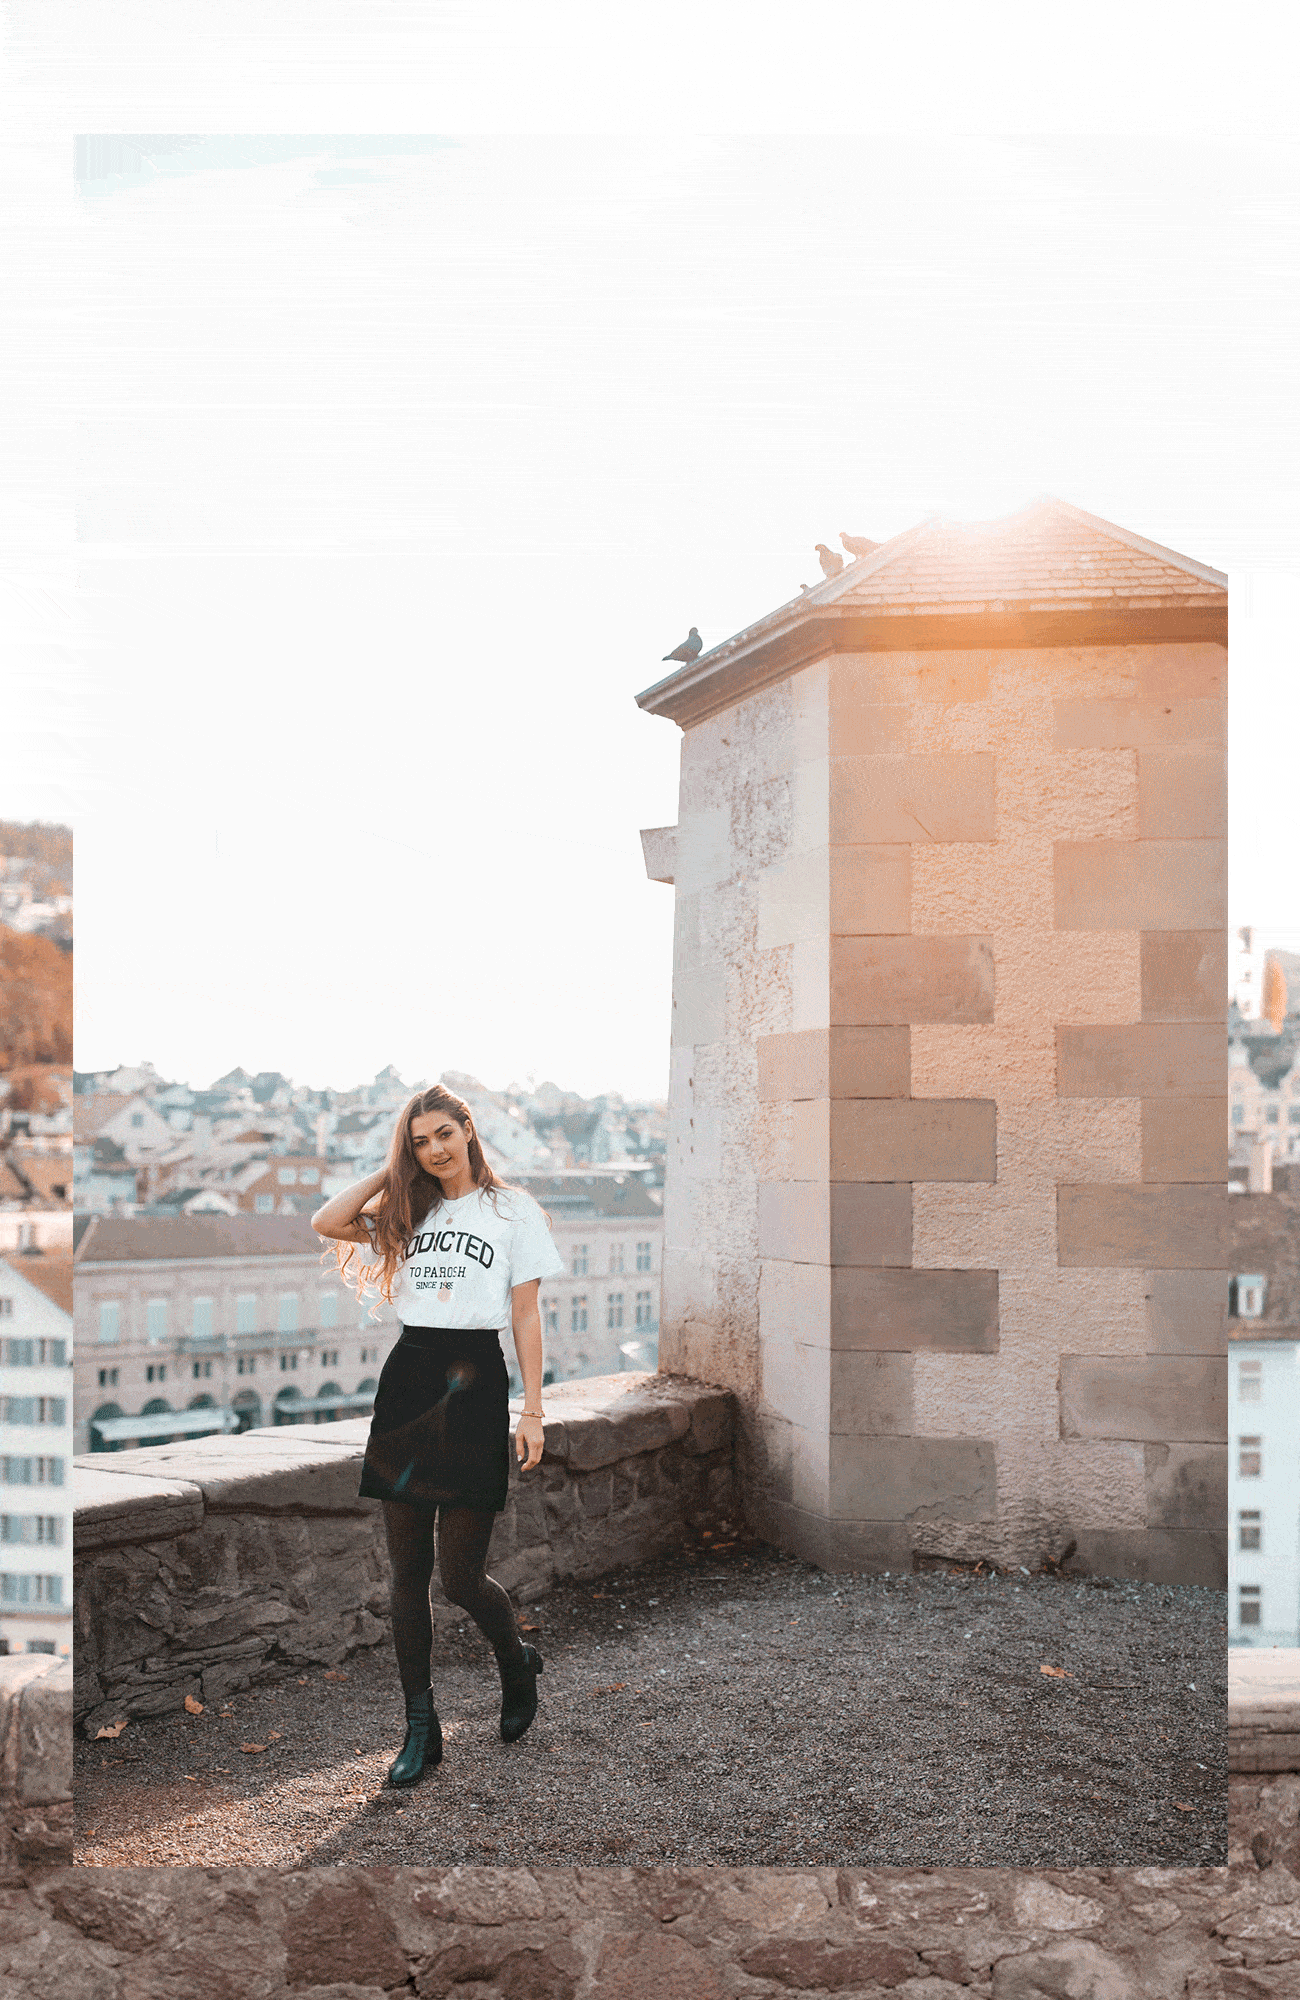 Jewelry, Details, Sunset, Golden Hour, Casual Look, Statement T-Shirt, Parosh, Corduroy, Ankle Boots, Necklace, Bracelet, Earrings, Essentials, Conscious, Sustainable, Conscious Fashion, Fashion Blogger, Fashion Blog, Fashion Magazine, Editorial, Canon Camera